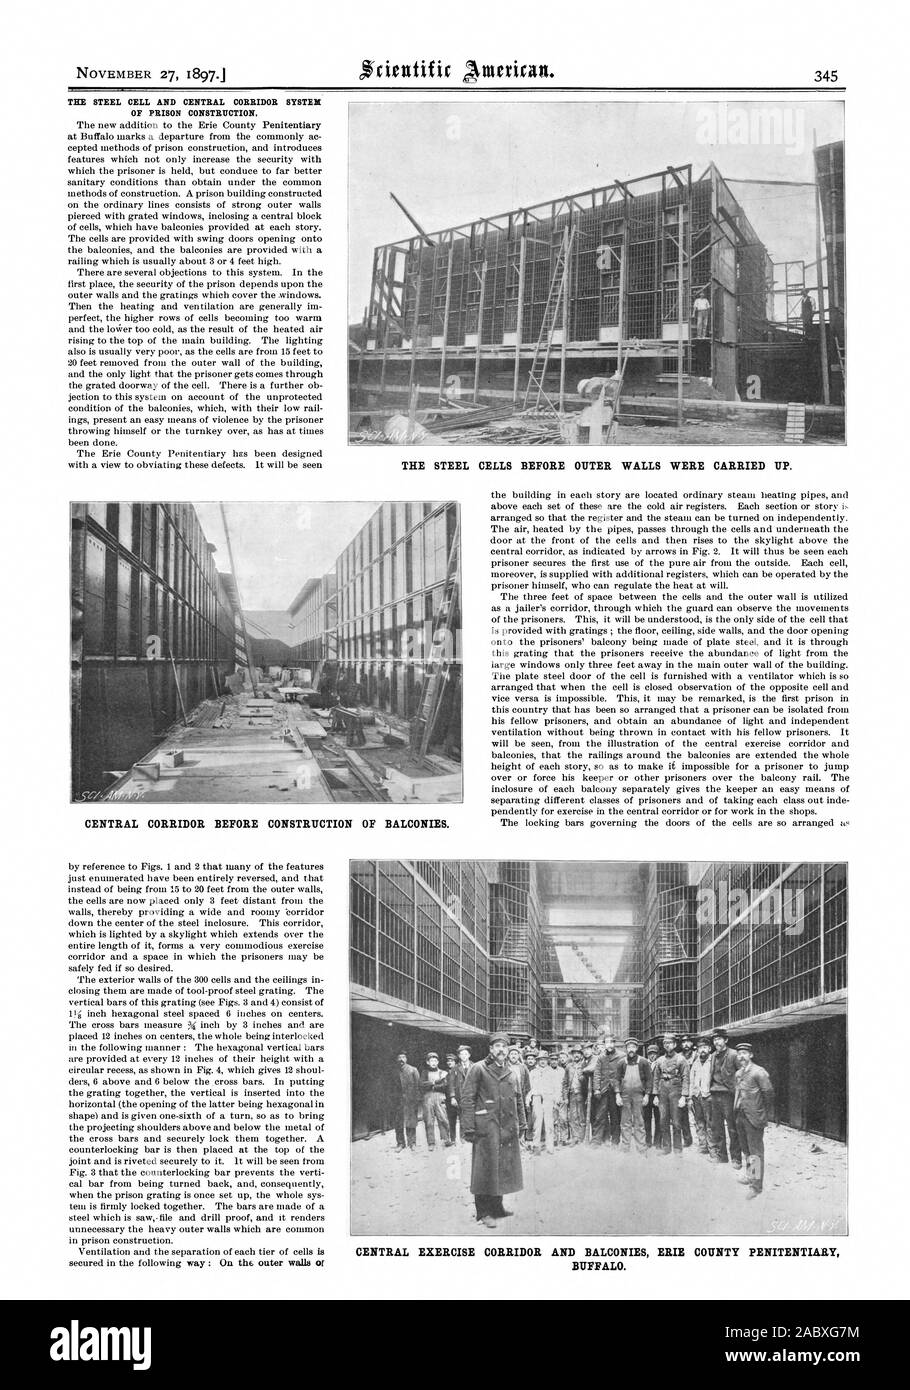 THE STEEL CELL AND CENTRAL CORRIDOR SYSTEM OF PRISON CONSTRUCTION. THE STEEL CELLS BEFORE OUTER WALLS WERE CARRIED UP. CENTRAL CORRIDOR BEFORE CONSTRUCTION OF BALCONIES. CENTRAL EXERCISE CORRIDOR AND BALCONIES ERIE COUNTY PENITENTIARY BUFFALO., scientific american, 1897-11-27 Stock Photo